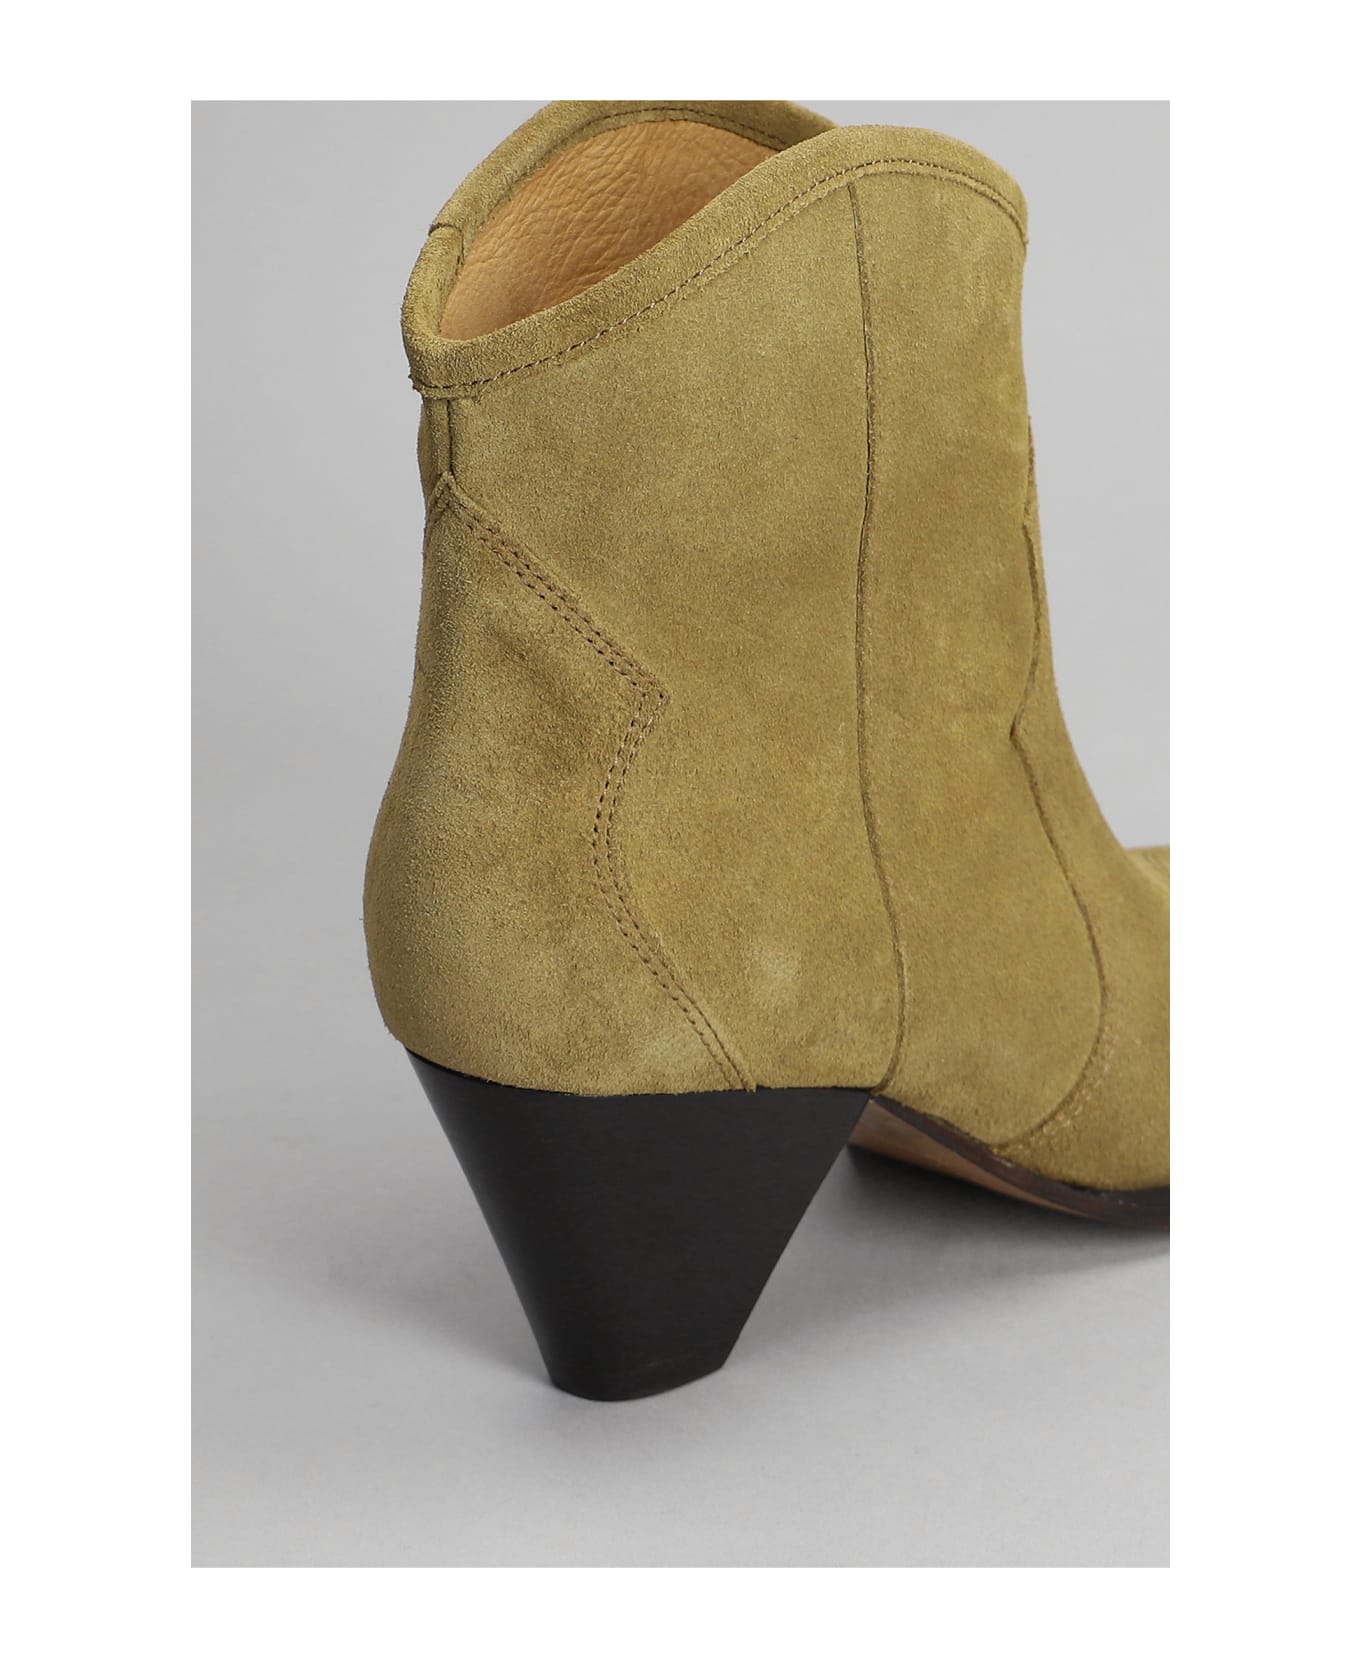 Isabel Marant Darizio Low Heels Ankle Boots In Taupe Suede - Dove Grey